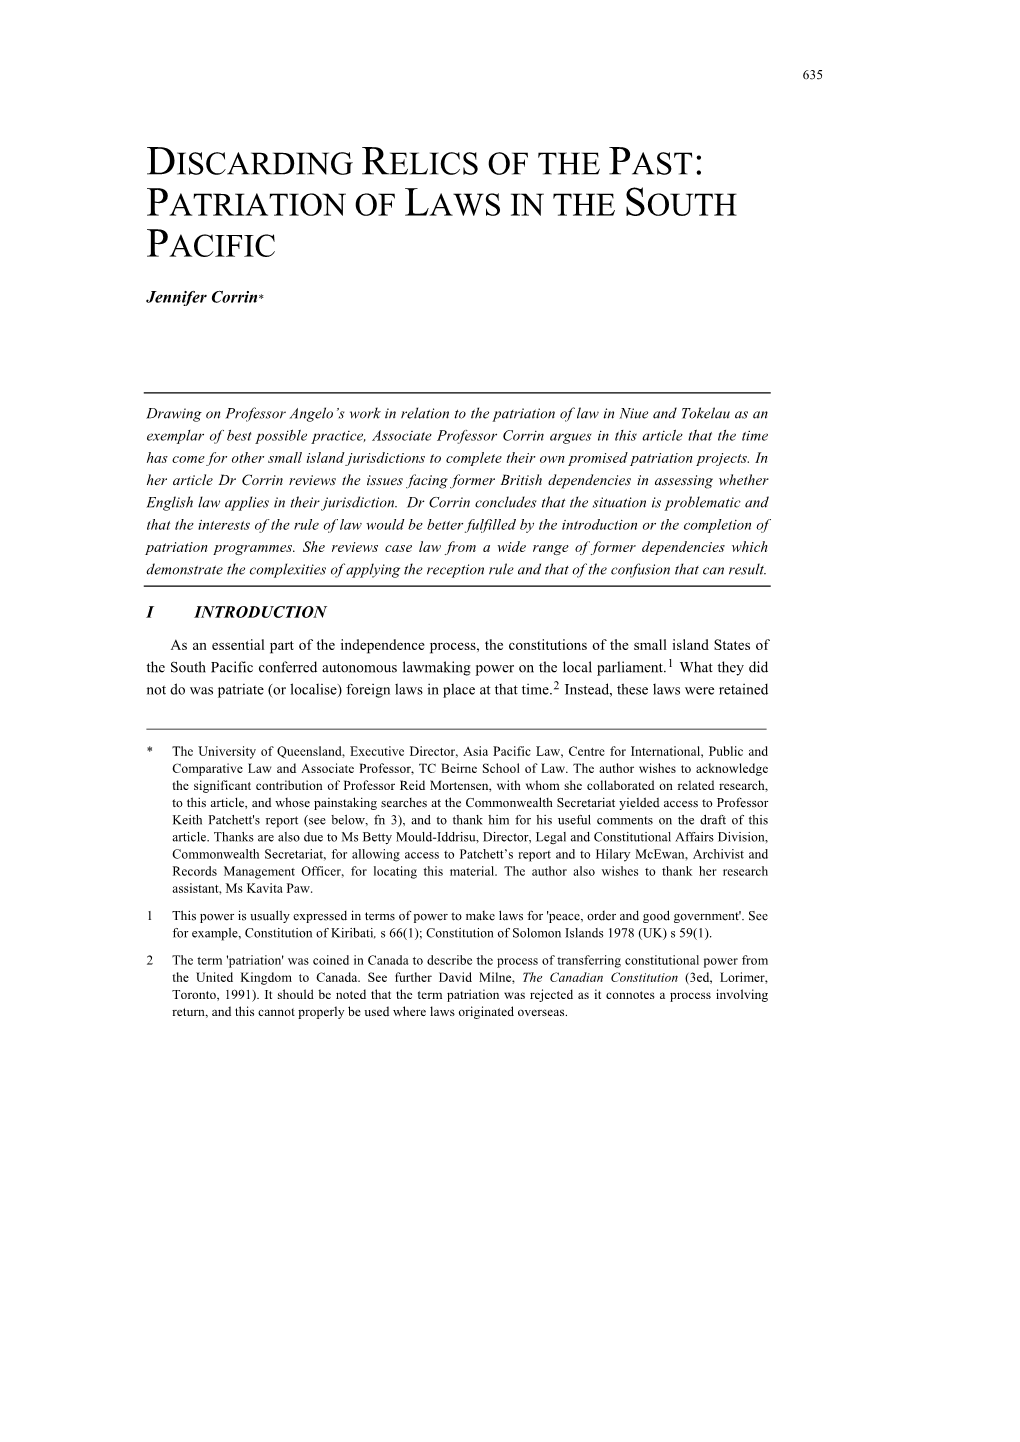 Patriation of Laws in the South Pacific